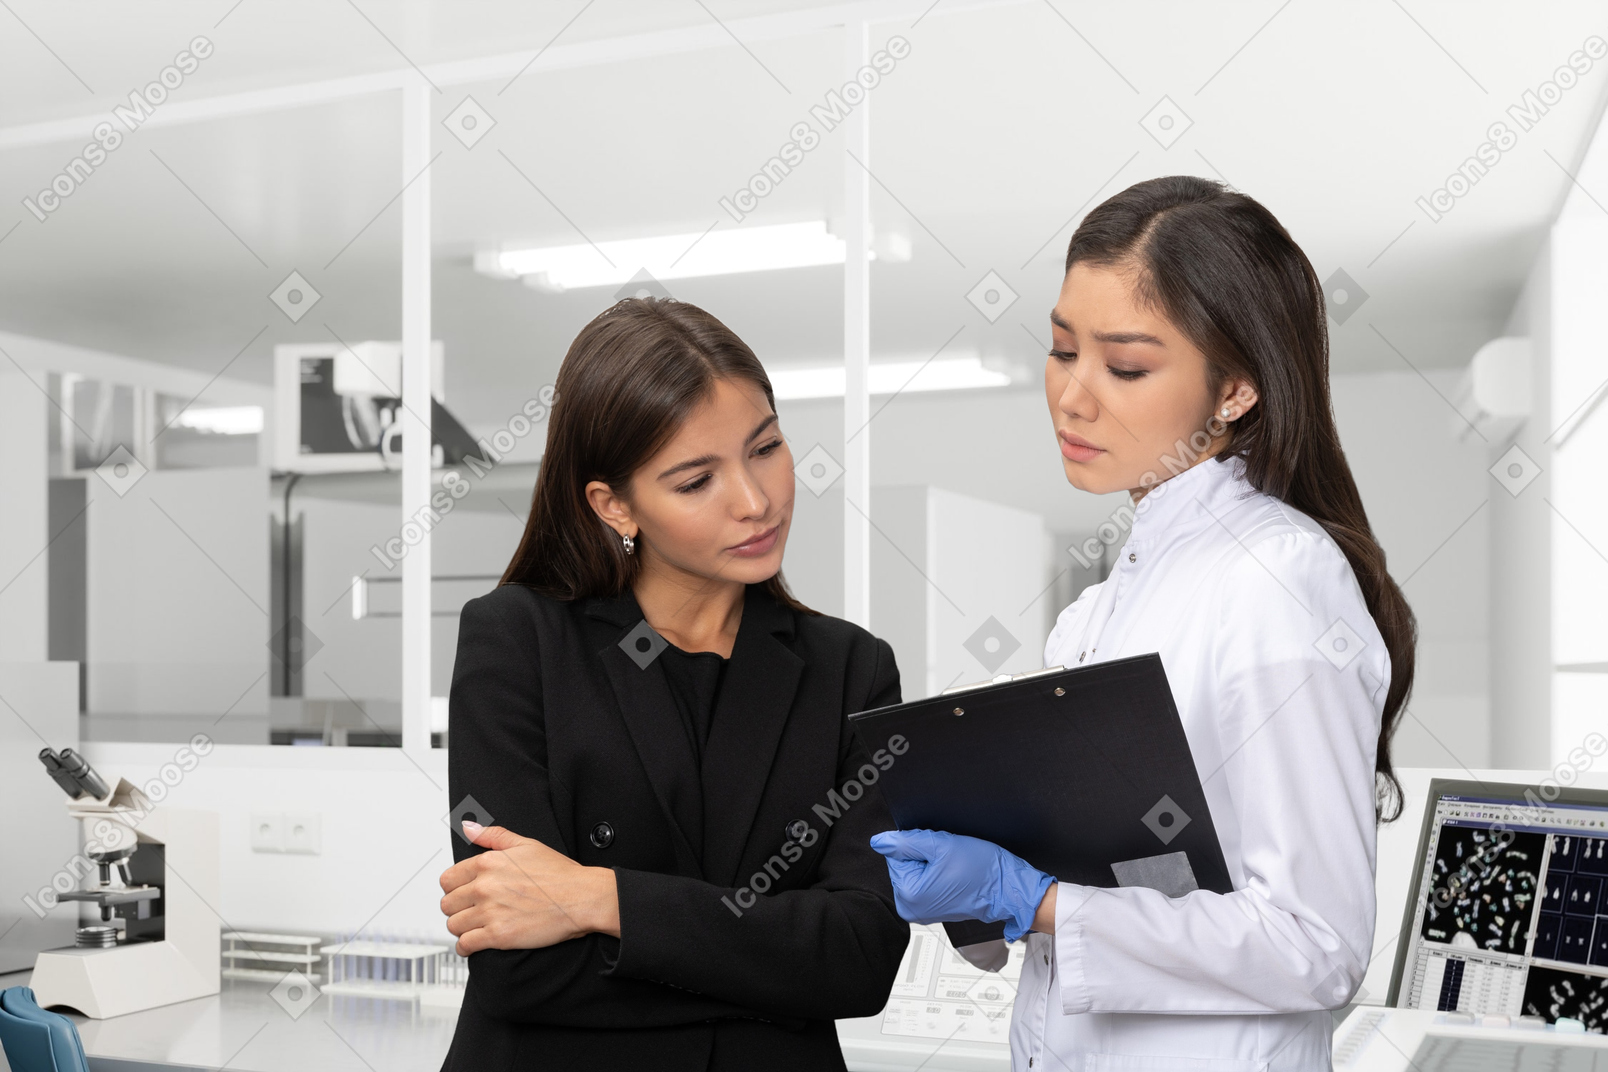 Two women talking to each other in a laboratory